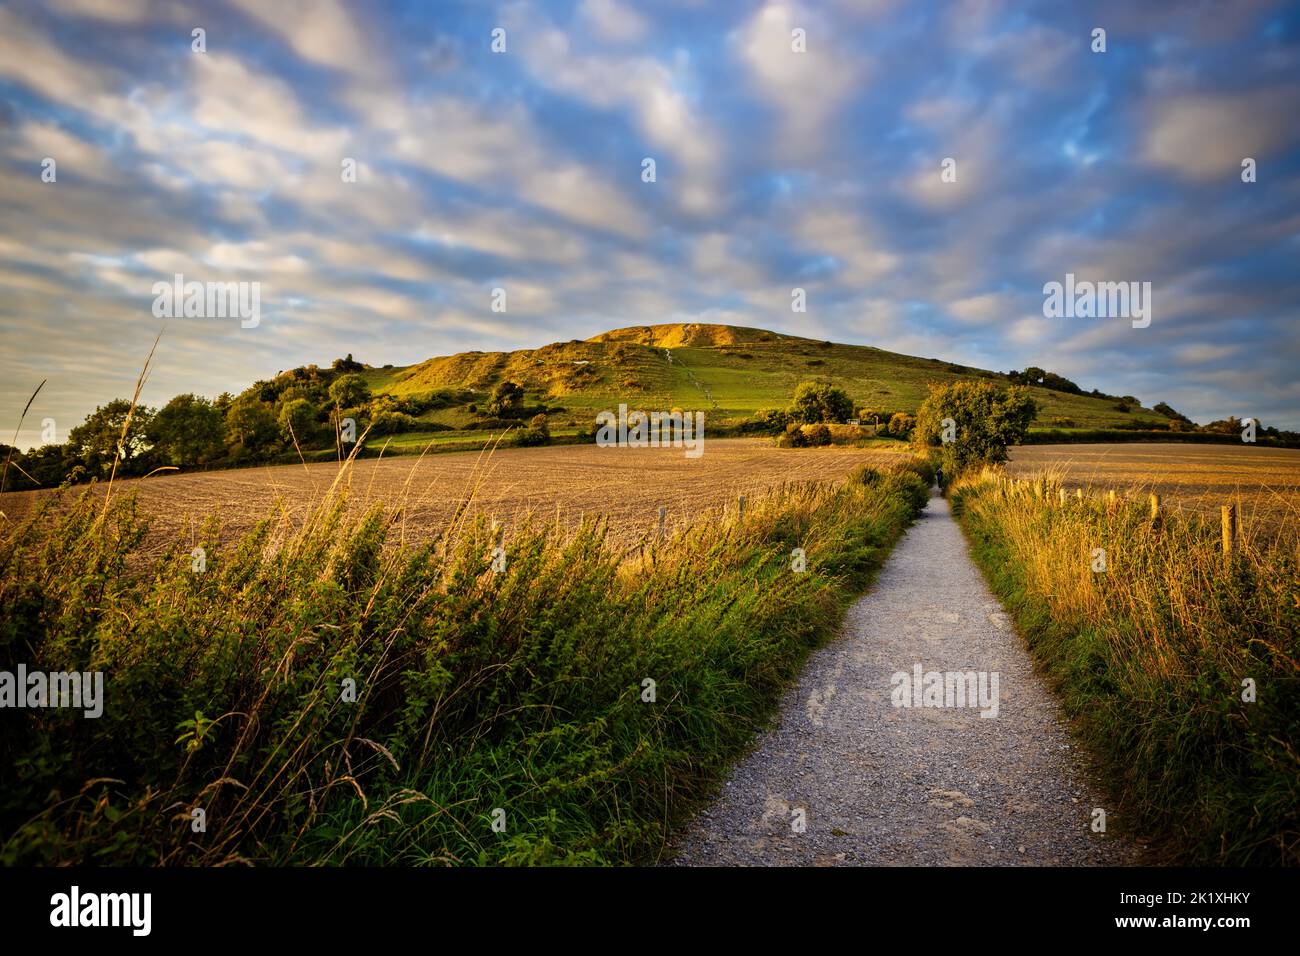 Cley Hill at dusk, Wiltshire Stock Photo